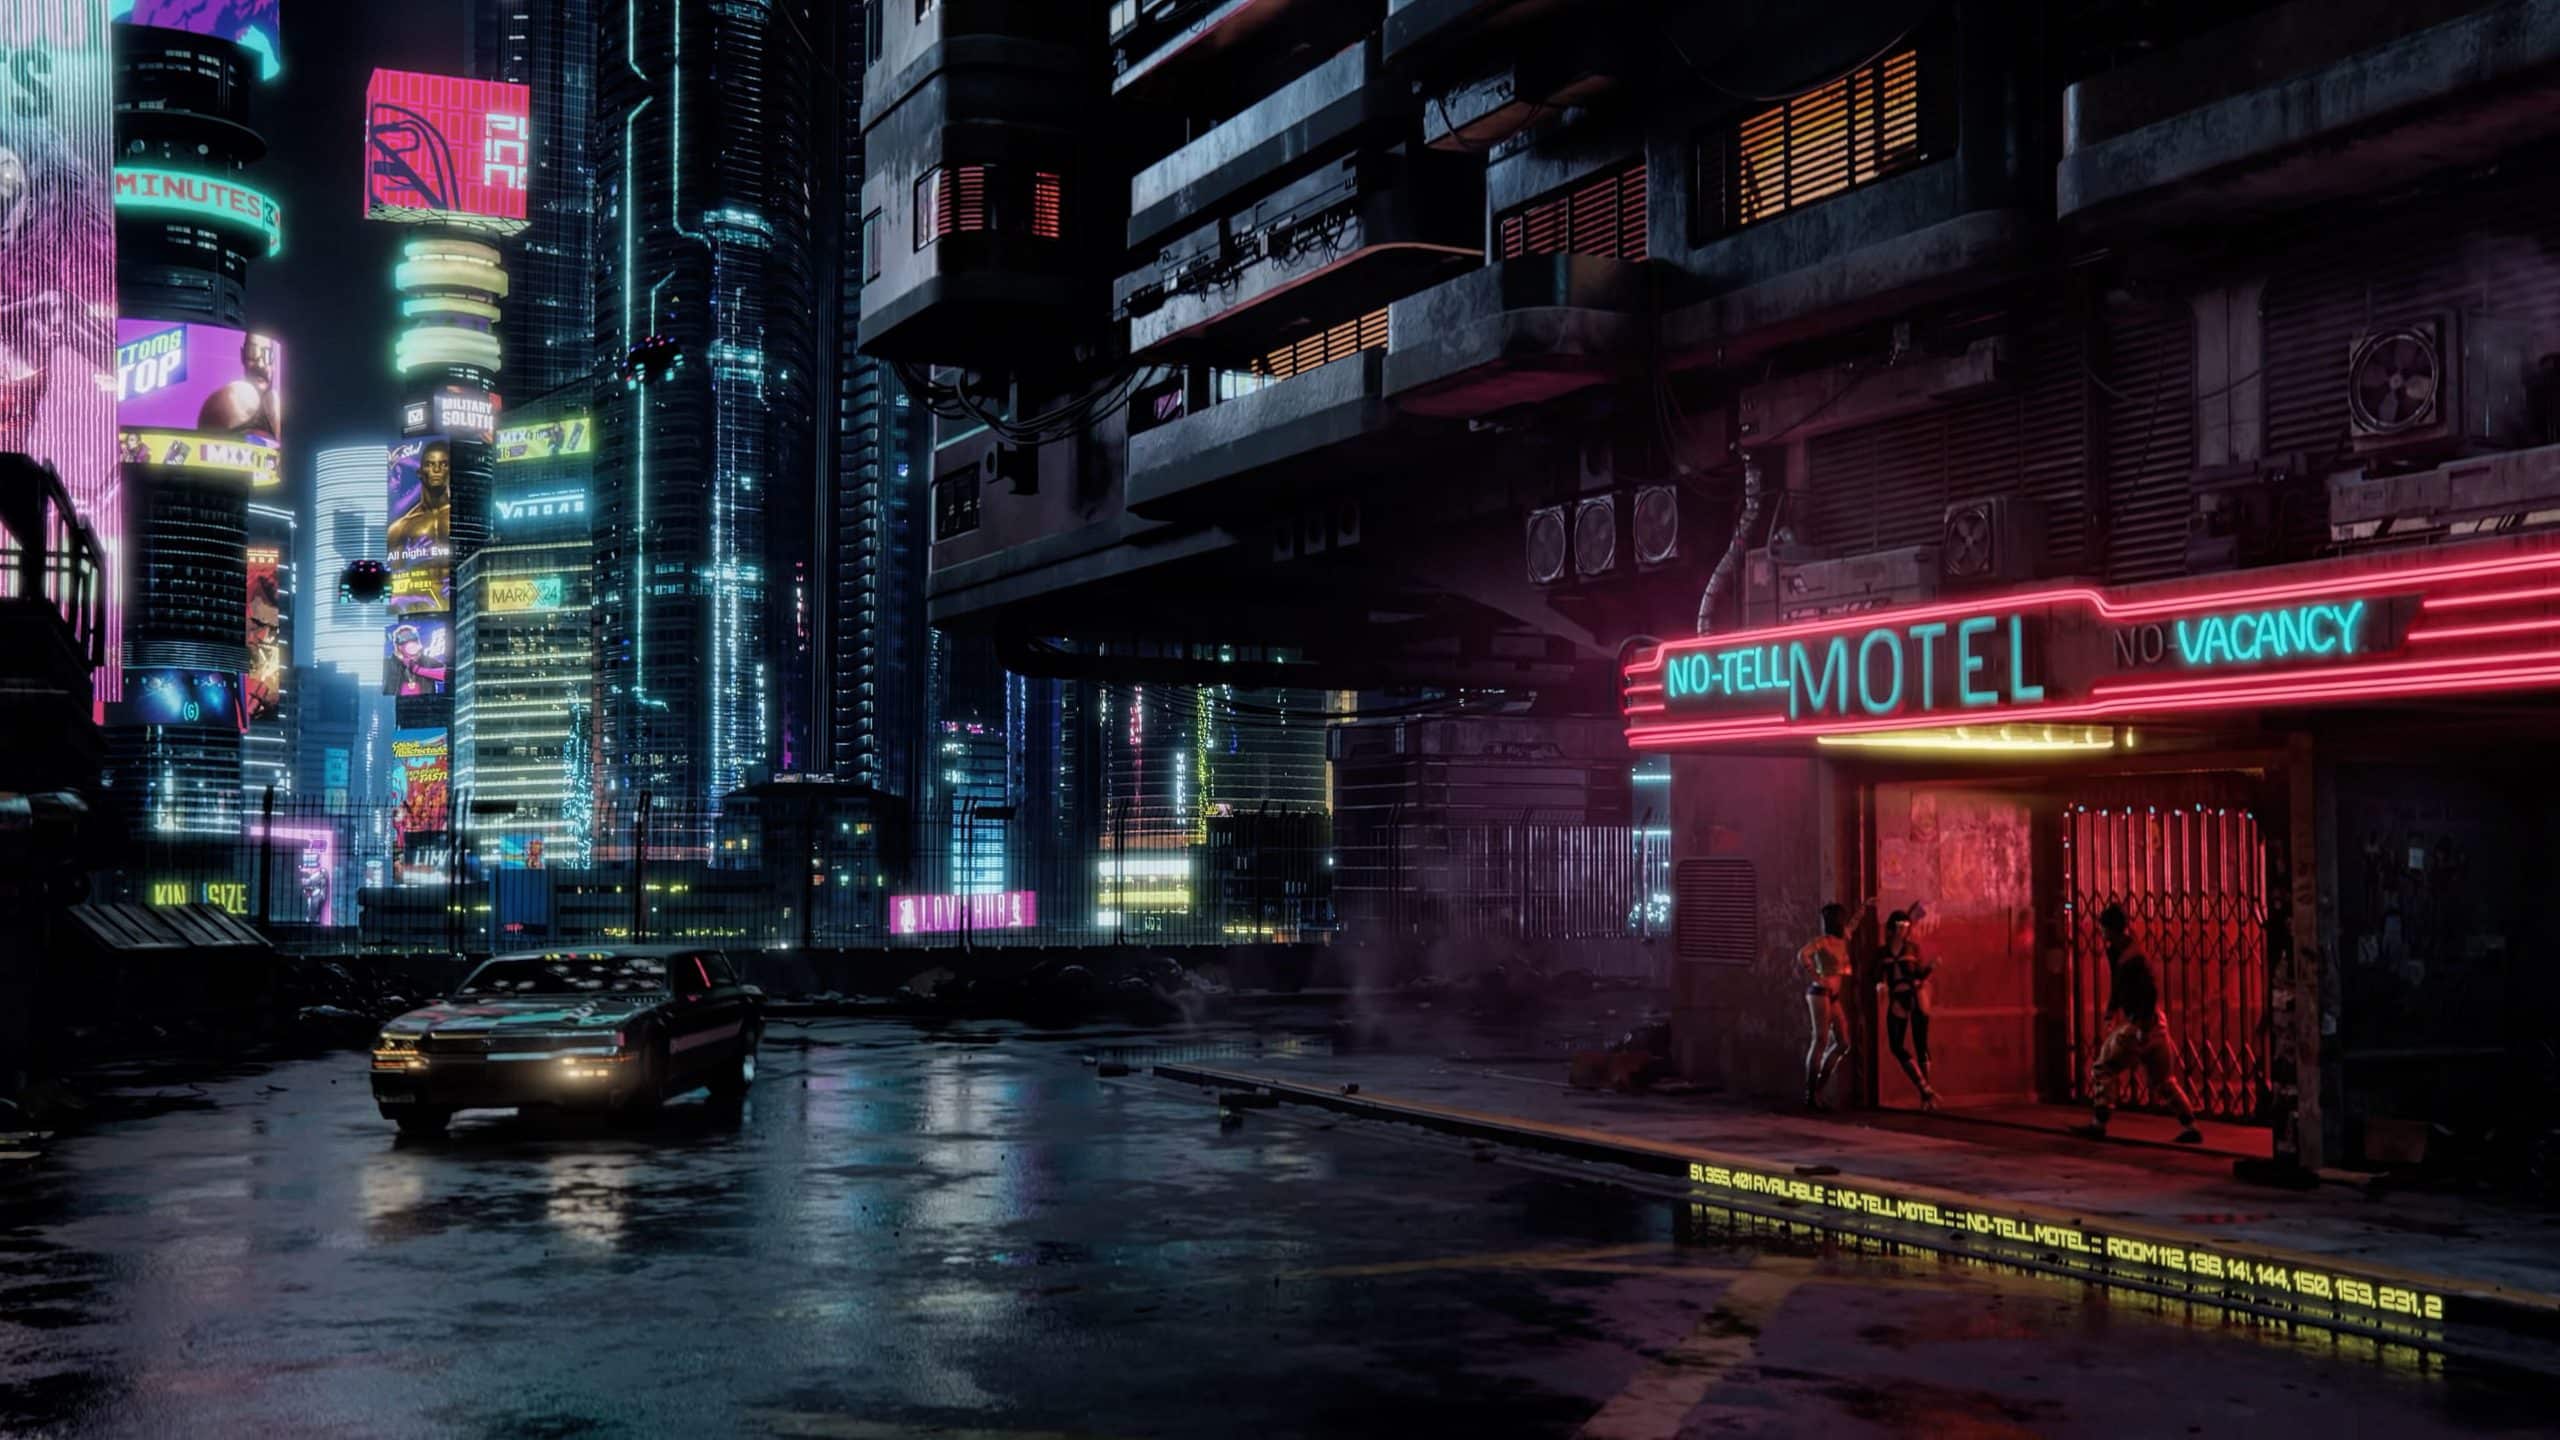 A futuristic city with neon lights and cars - Cyberpunk